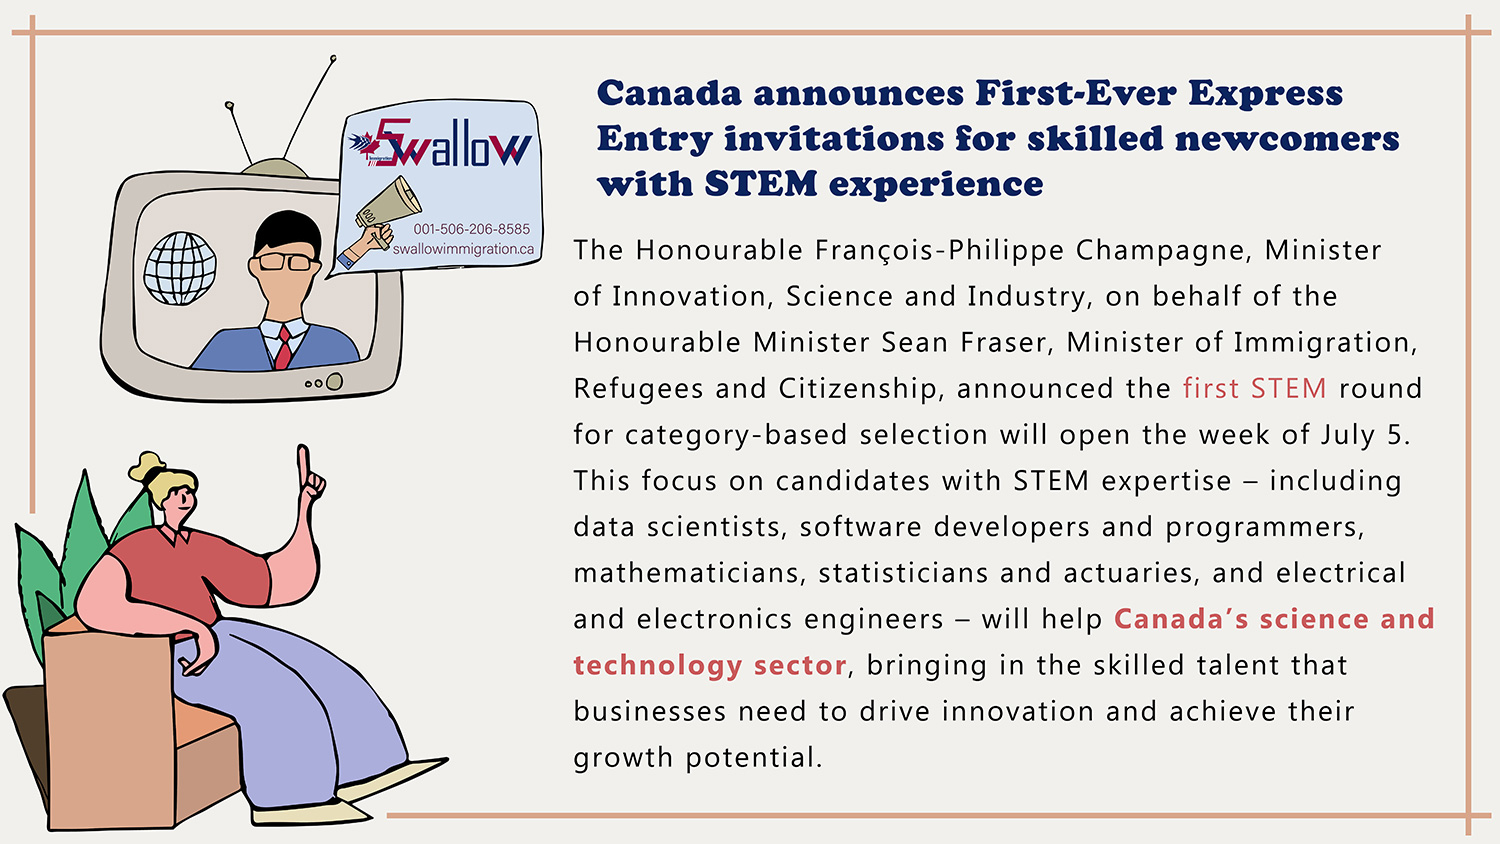 Canada announces First-Ever Express Entry invitations for skilled newcomers with STEM experience